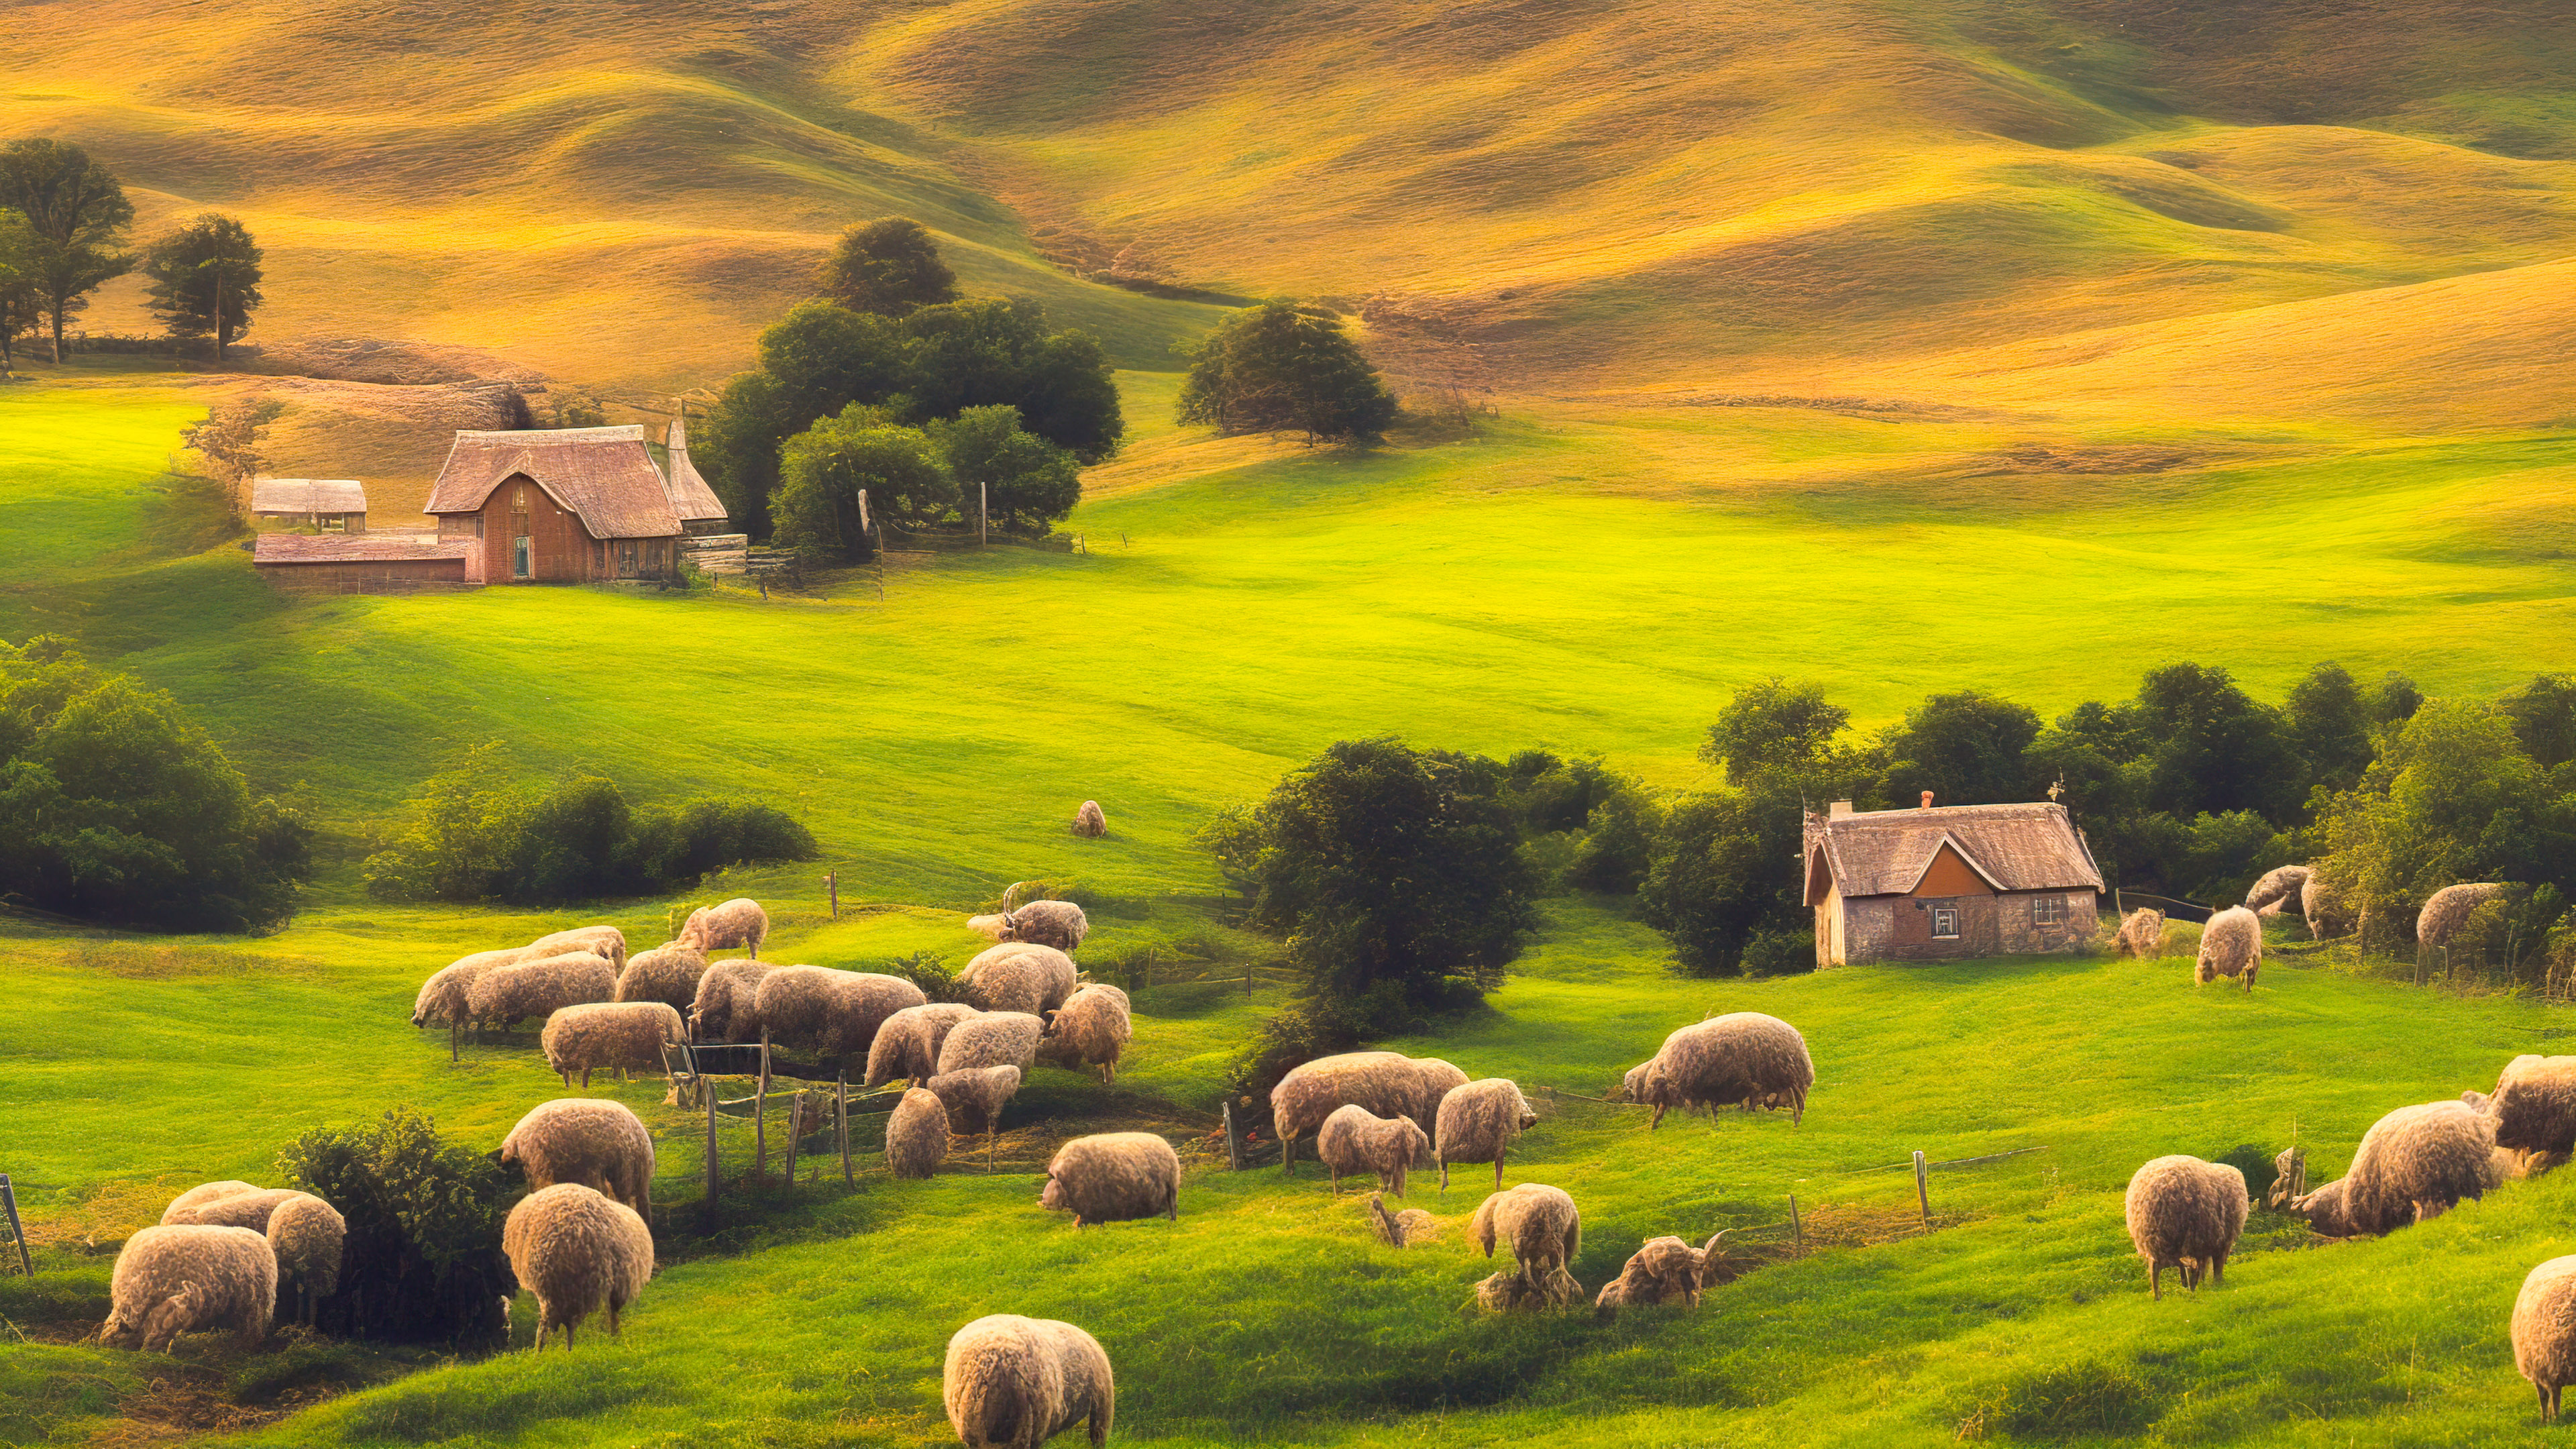 Download the serenity of our 4K desktop wallpaper landscape, capturing a peaceful countryside cottage nestled among rolling hills, surrounded by sheep grazing.